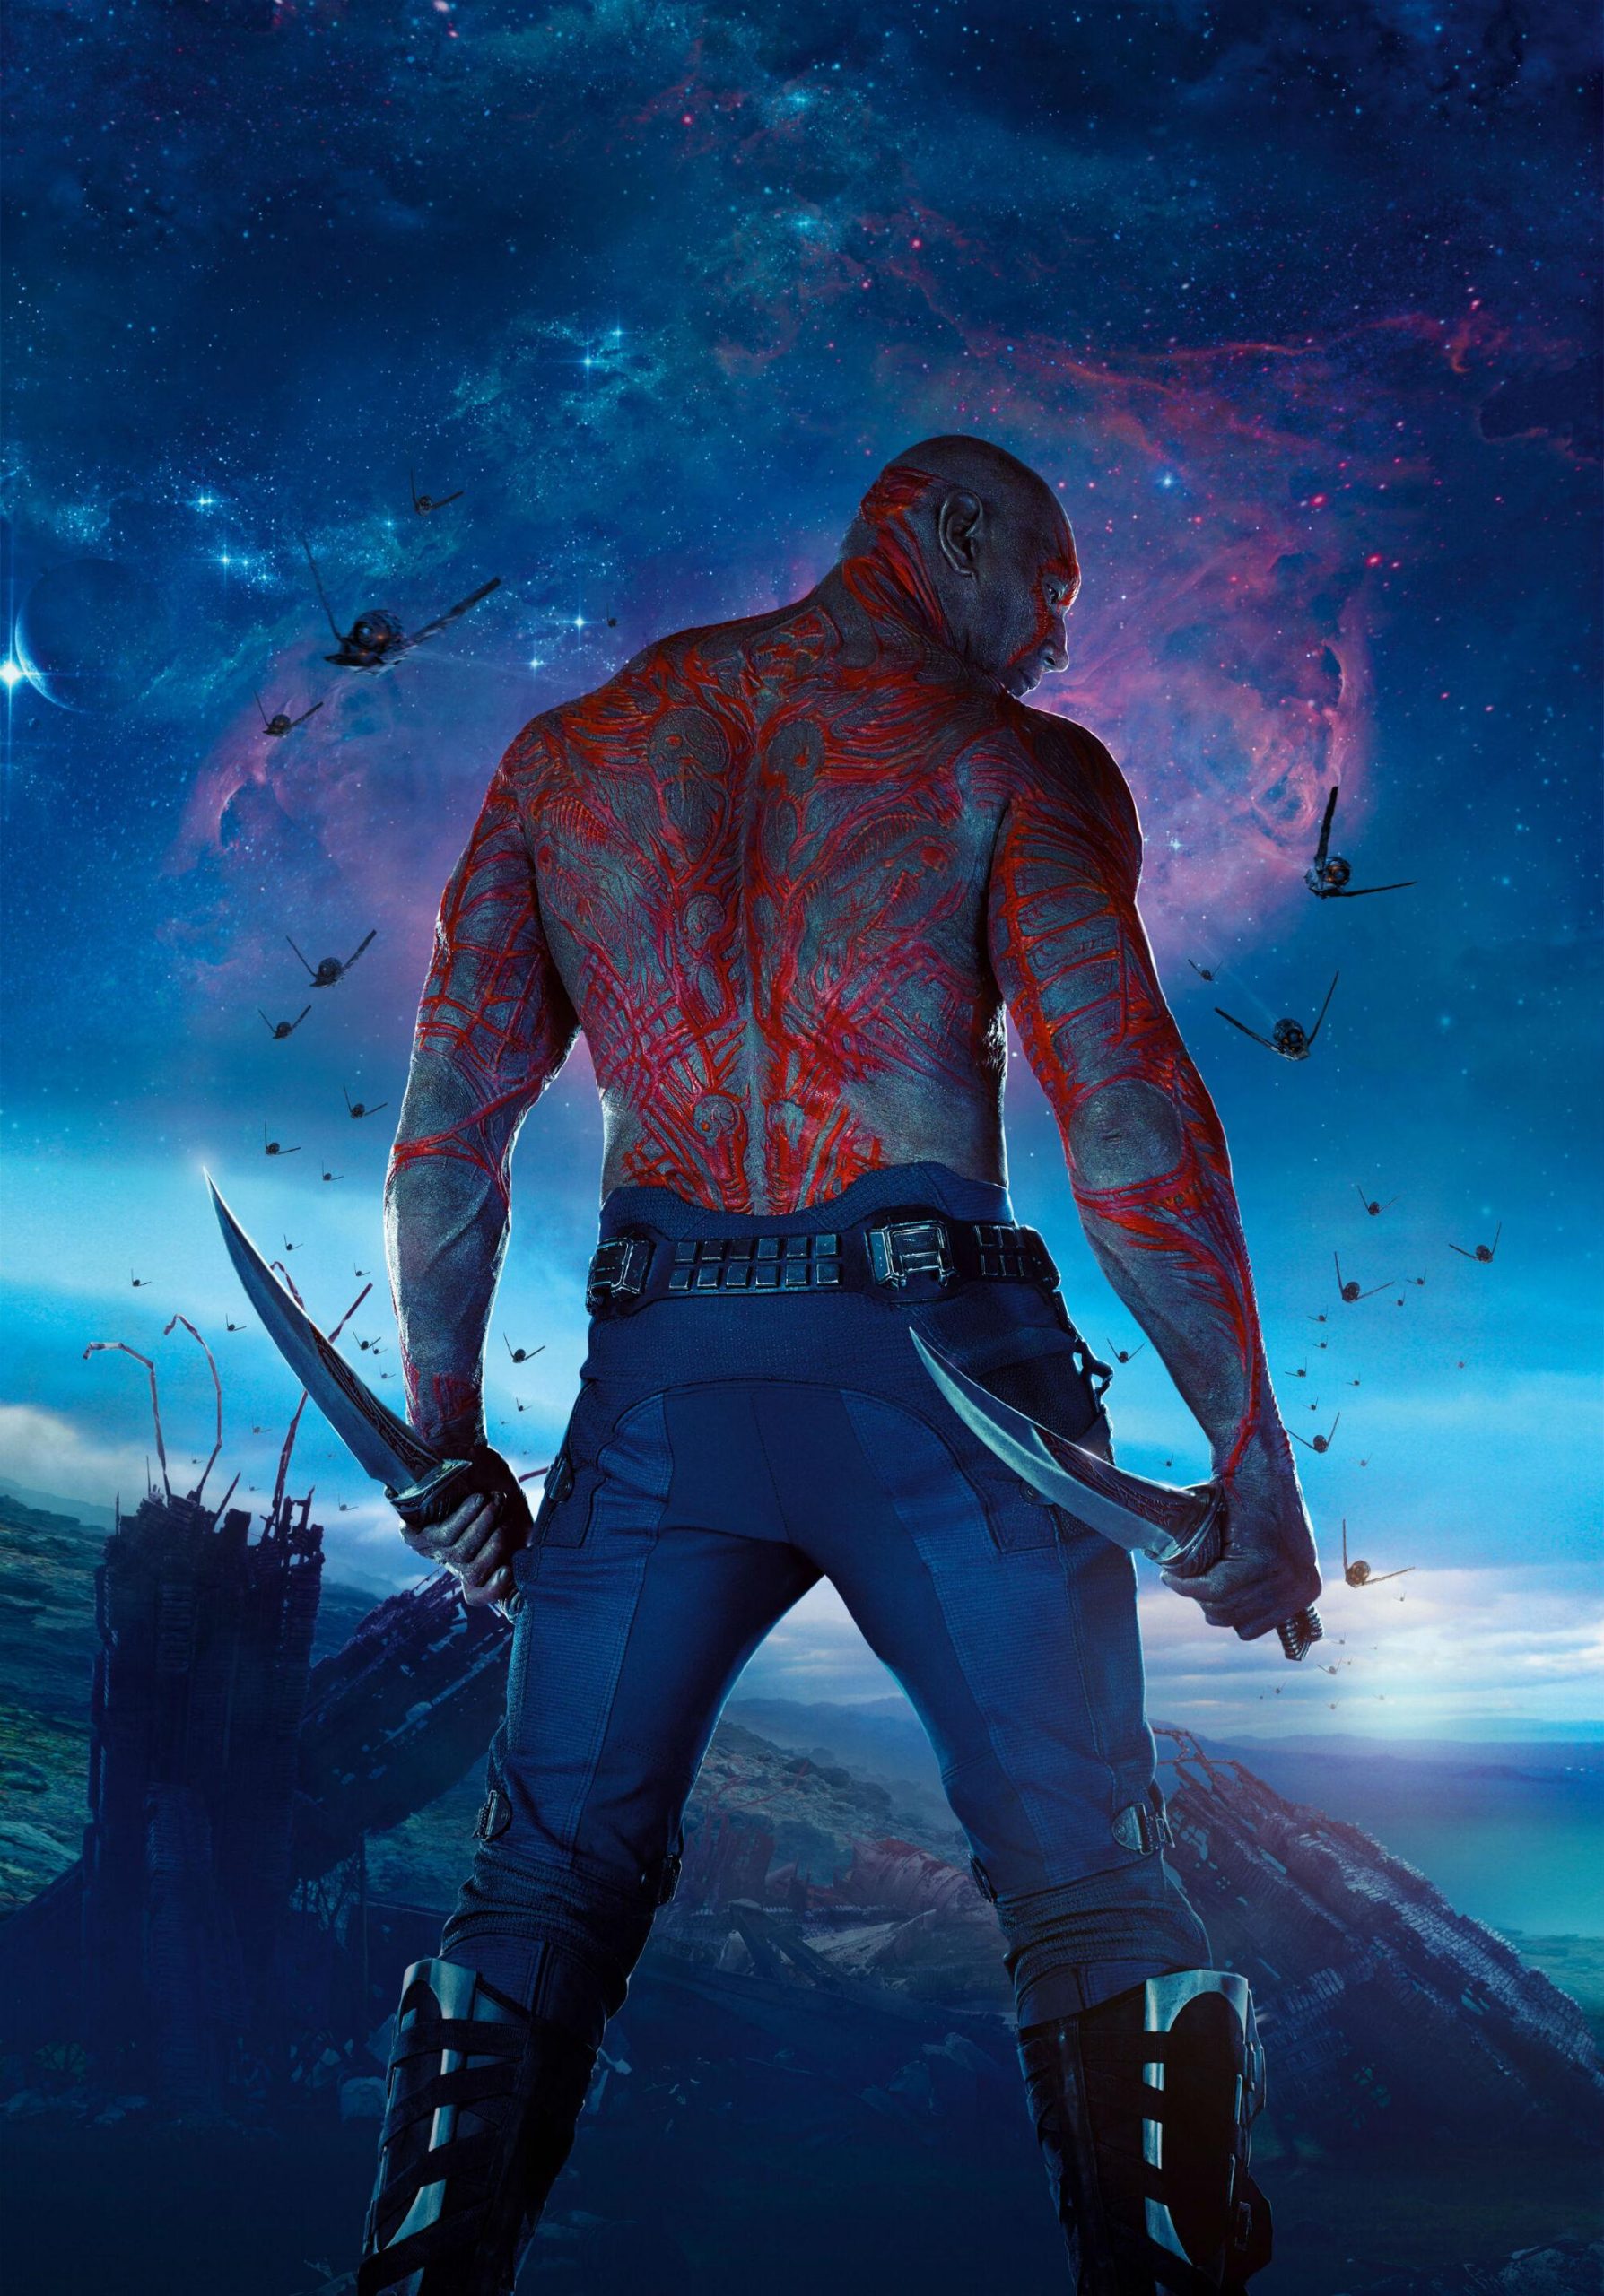 Drax The Destroyer Guardians Of The Galaxy Hd Wallpapers For Pc, Drax The Destroyer Guardians Of The Galaxy, Movies